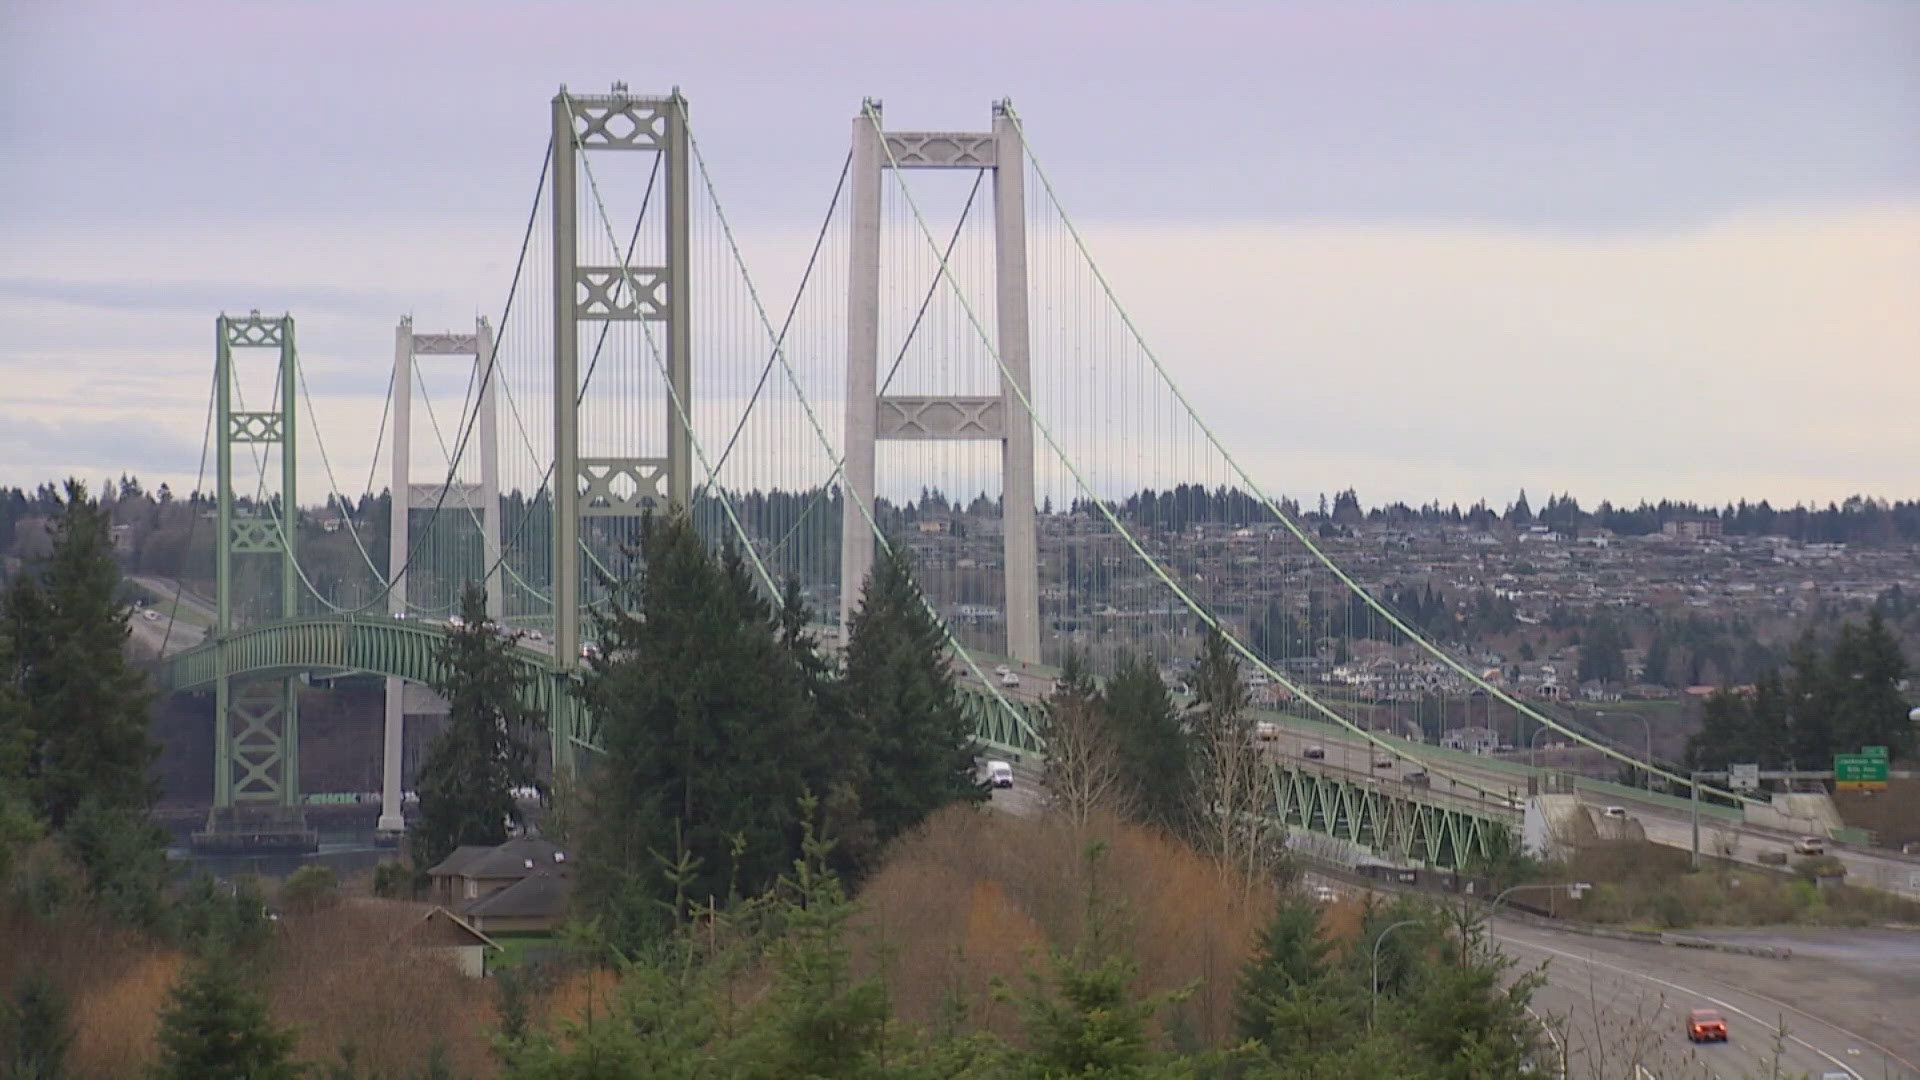 The closure has reduced westbound State Route 16 to two lanes over the Narrows Bridge.